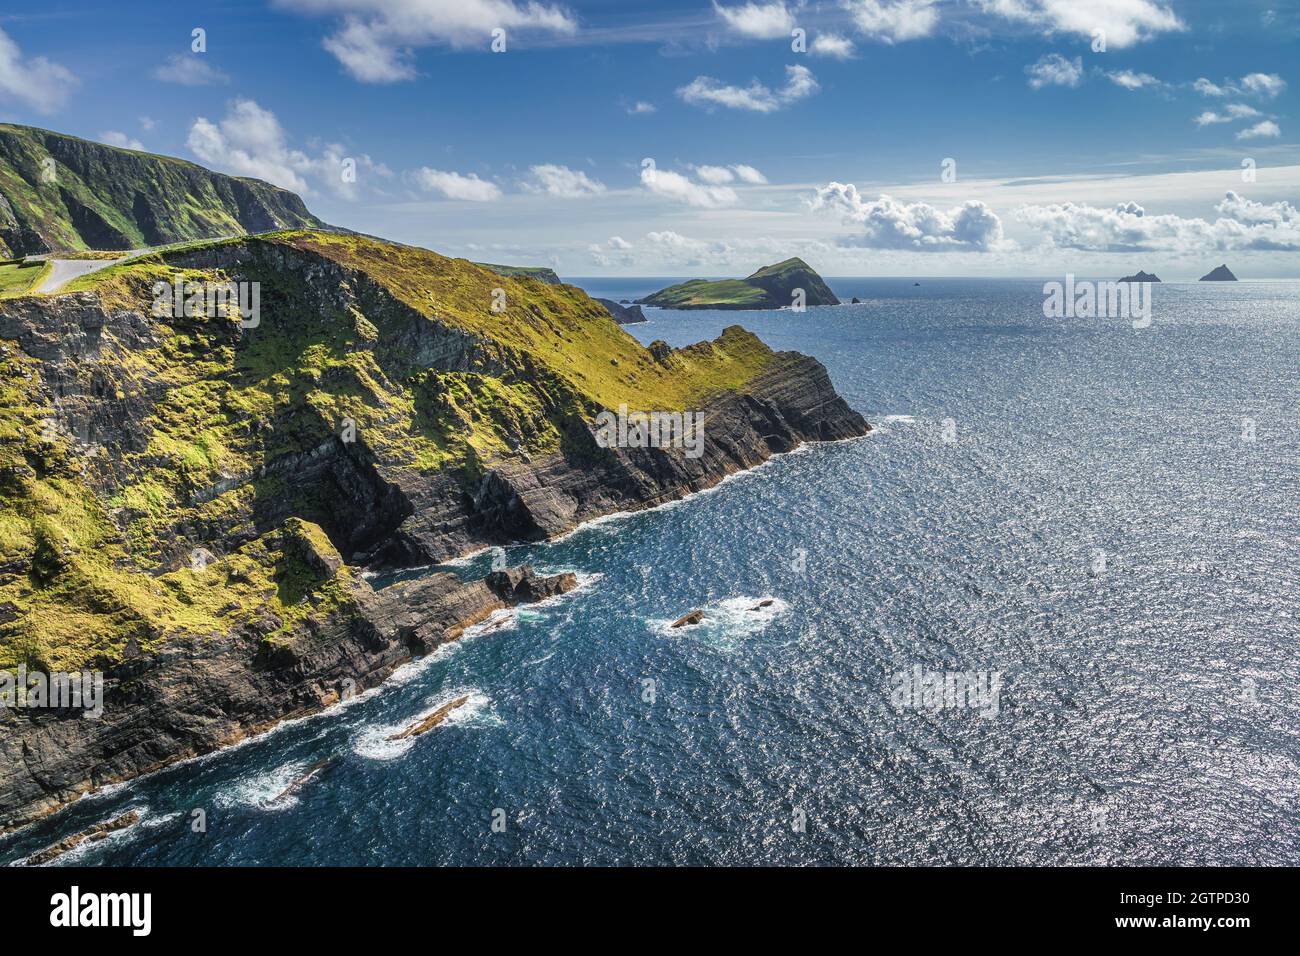 Kerry Cliffs And A View On Skellig Michael Island. Star Wars Film Location,  Ring Of Kerry, Ireland Stock Photo - Alamy